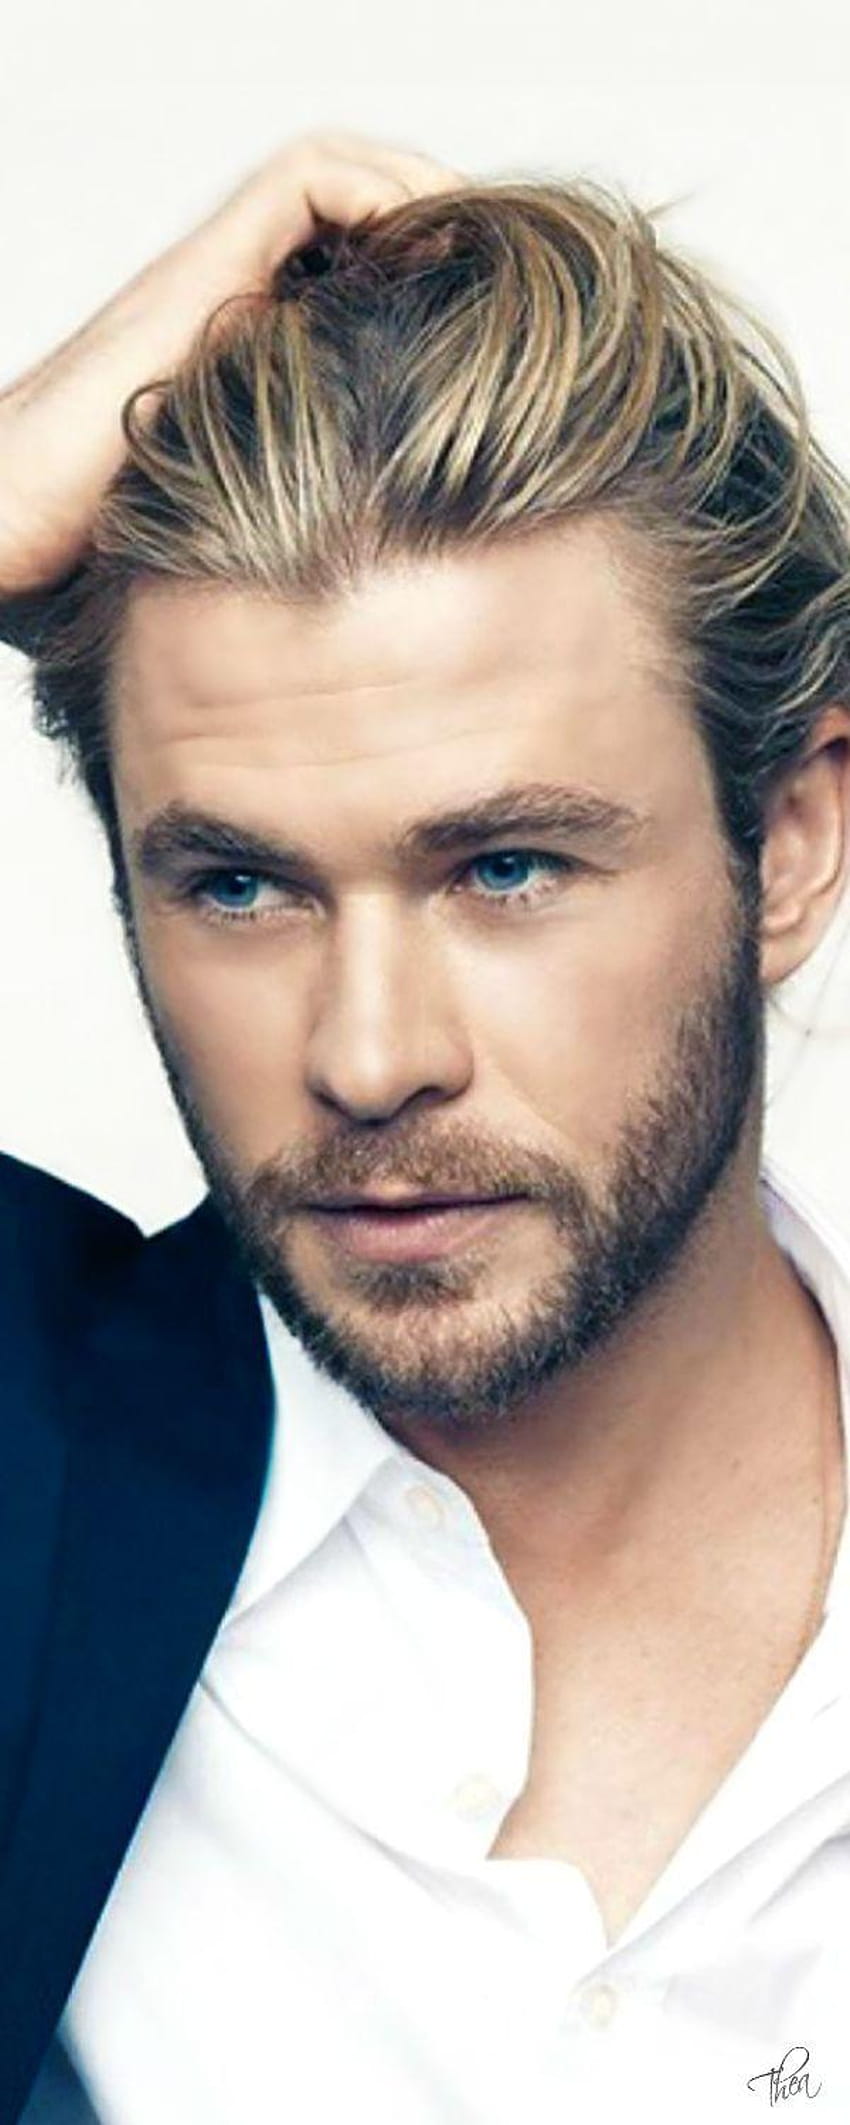 Chris Hemsworth hair: Here's how to get the look